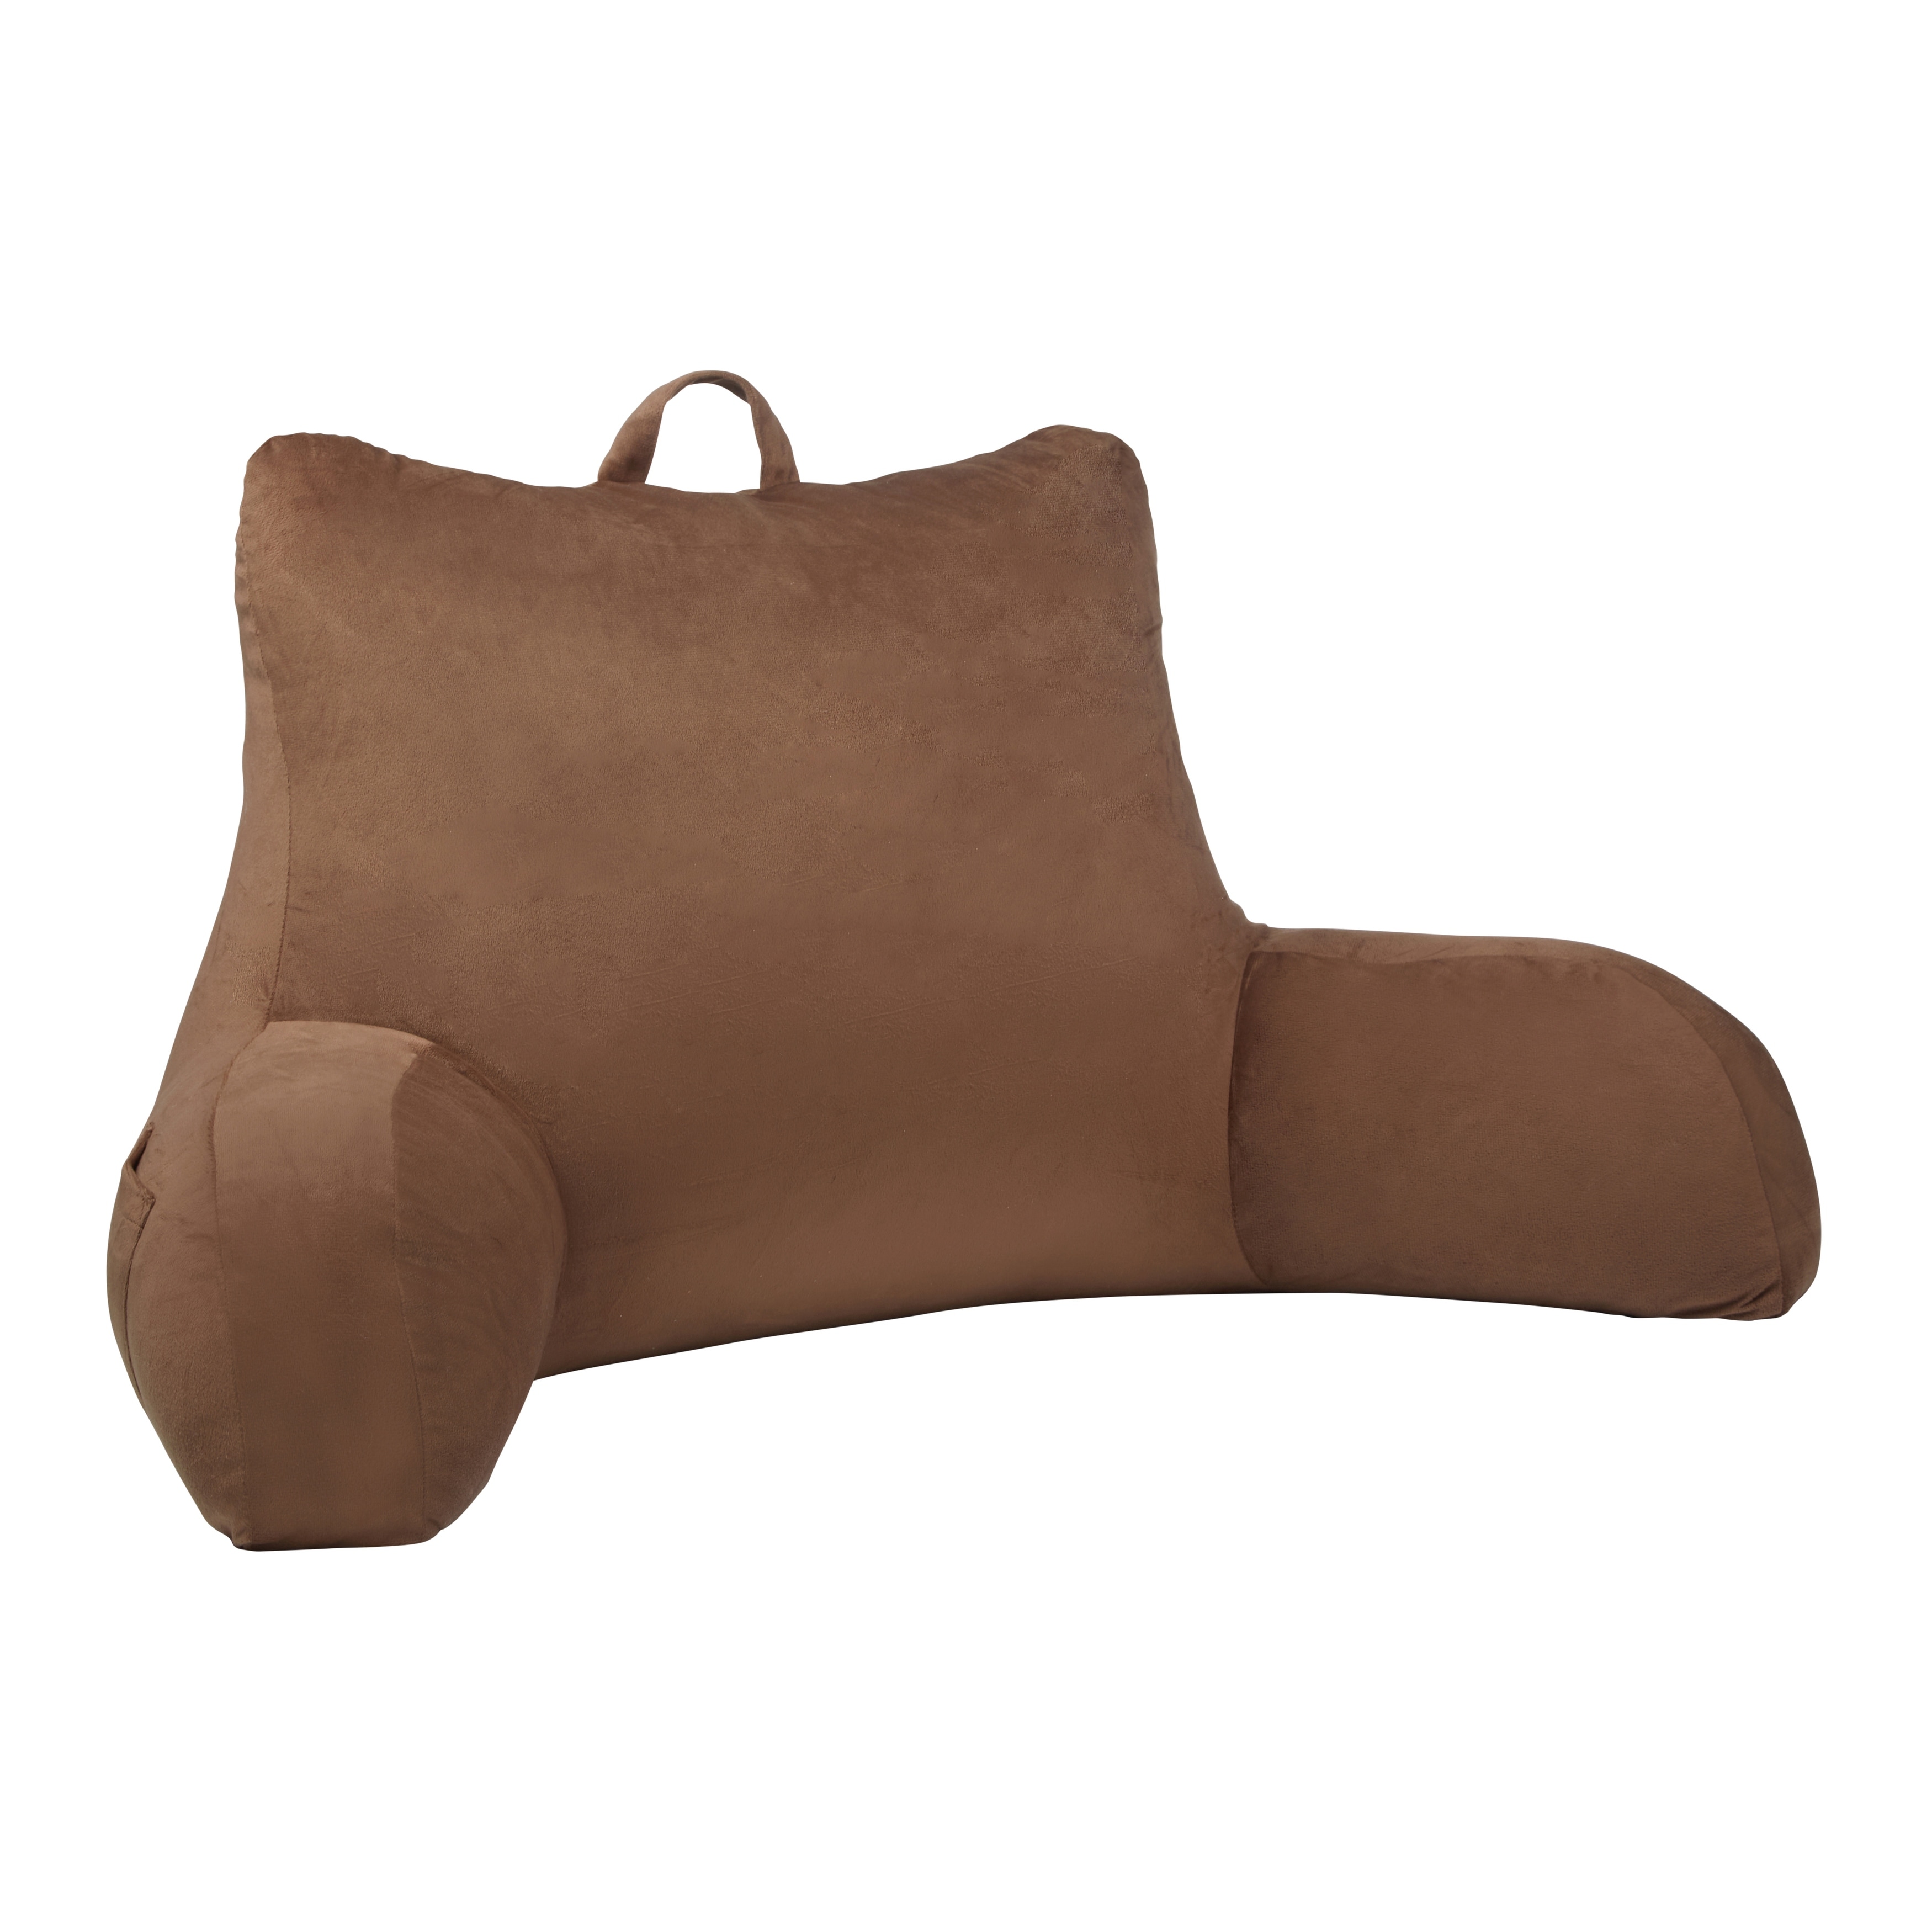 https://ak1.ostkcdn.com/images/products/is/images/direct/6eb0bde2ff10522d0ae7c660e7cd0fbfa11c42e2/Klear-Vu-Velour-Bed-Rest-Back-Support-Pillow-with-Pocket-and-Handle.jpg